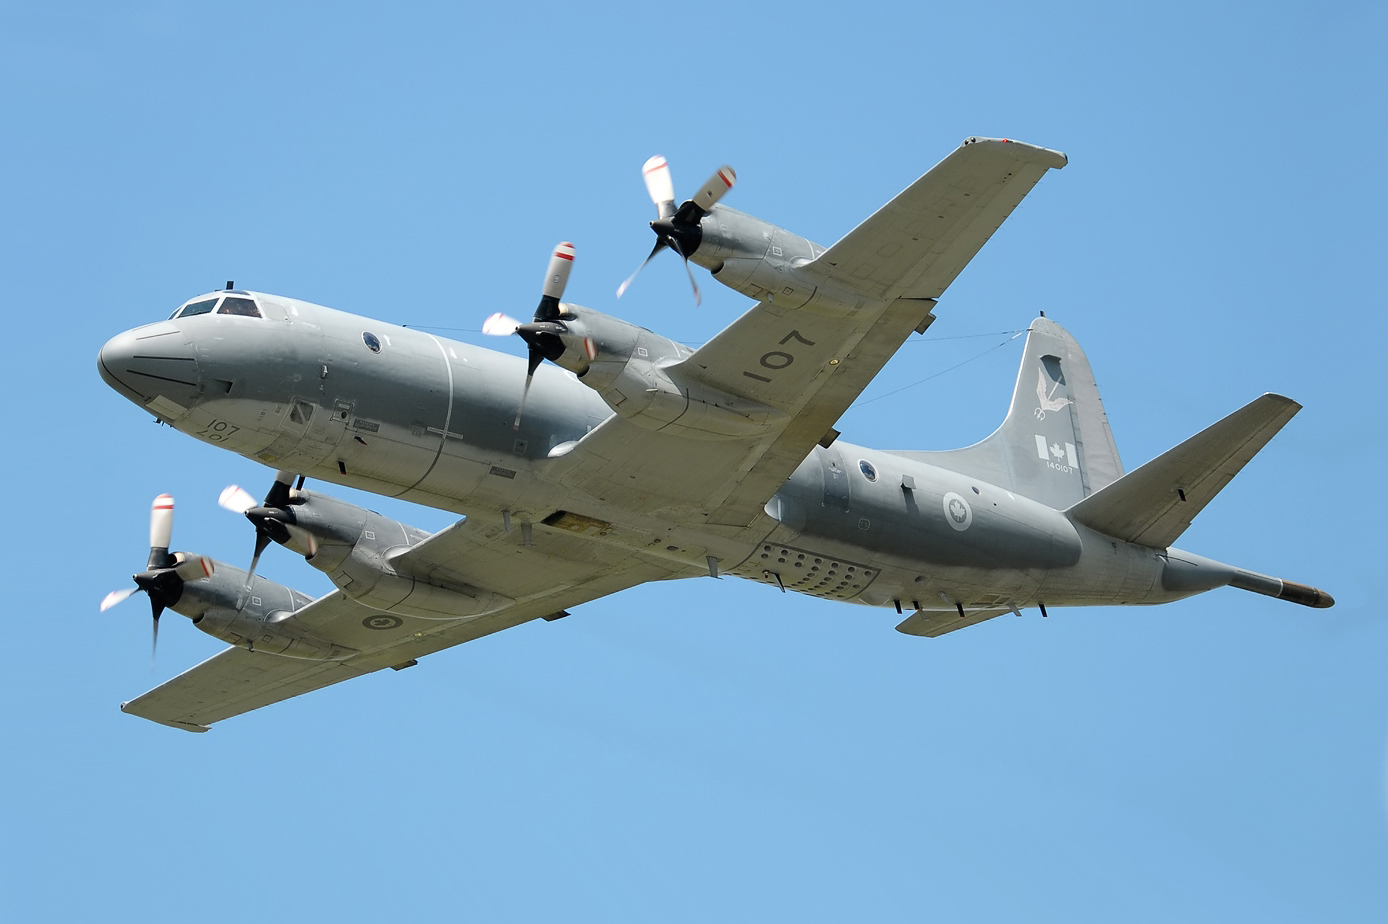 A Canadian Air Force Lockheed CP-140 in flight